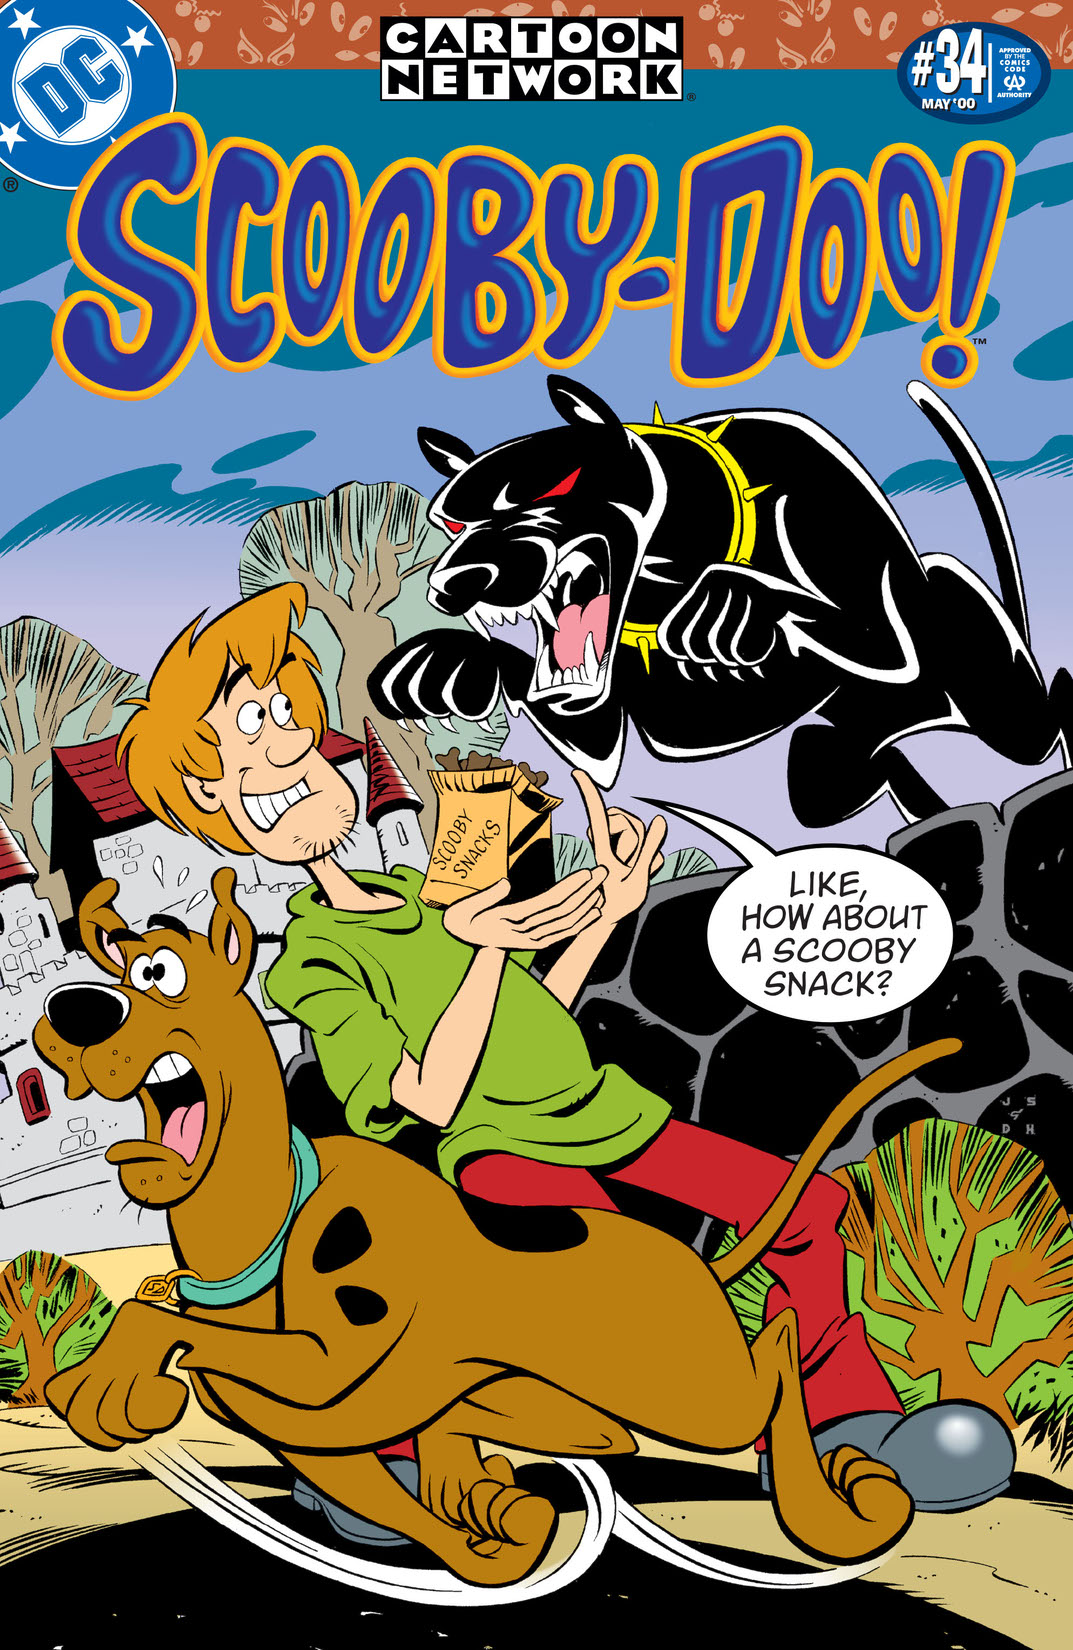 Scooby-Doo #34 preview images